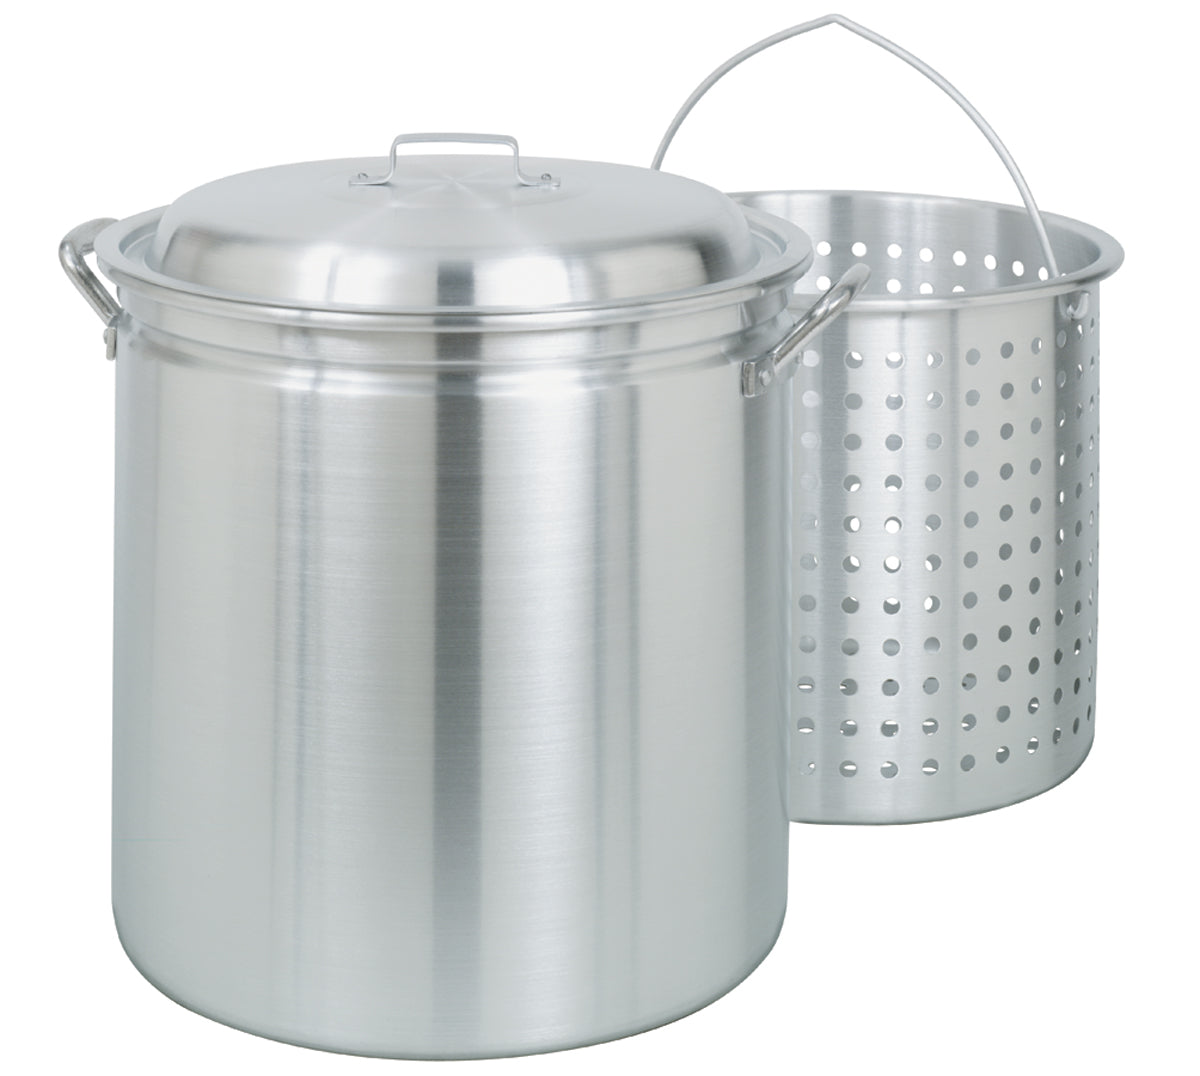 34-qt Aluminum Stockpot with Basket ~ a handcrafted classic